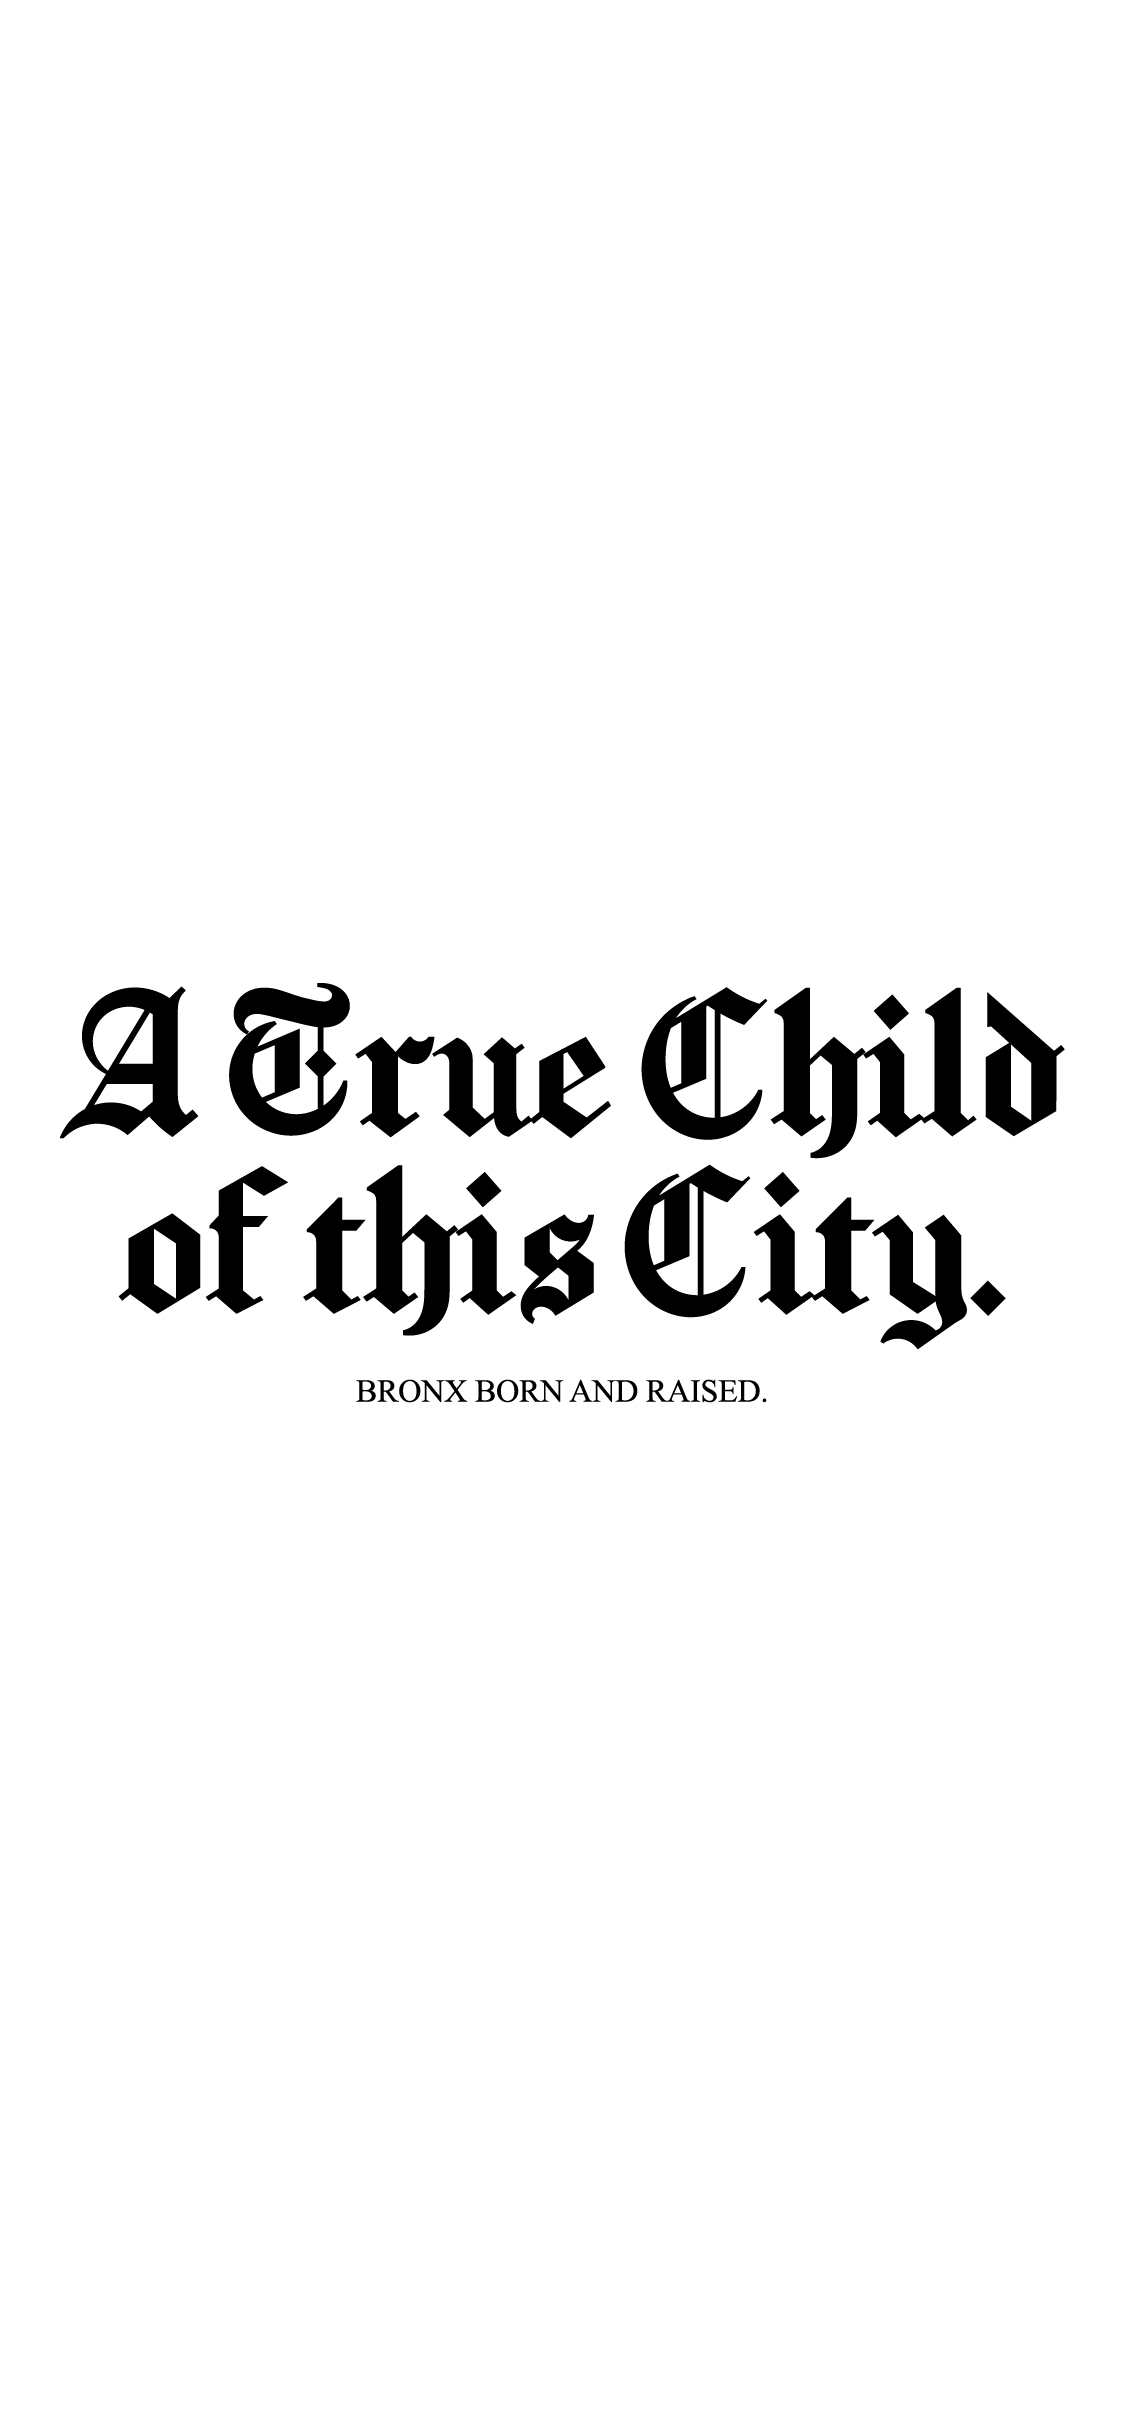 phone wallpaper displaying nyc // a true child of the city (new york times, the bronx)